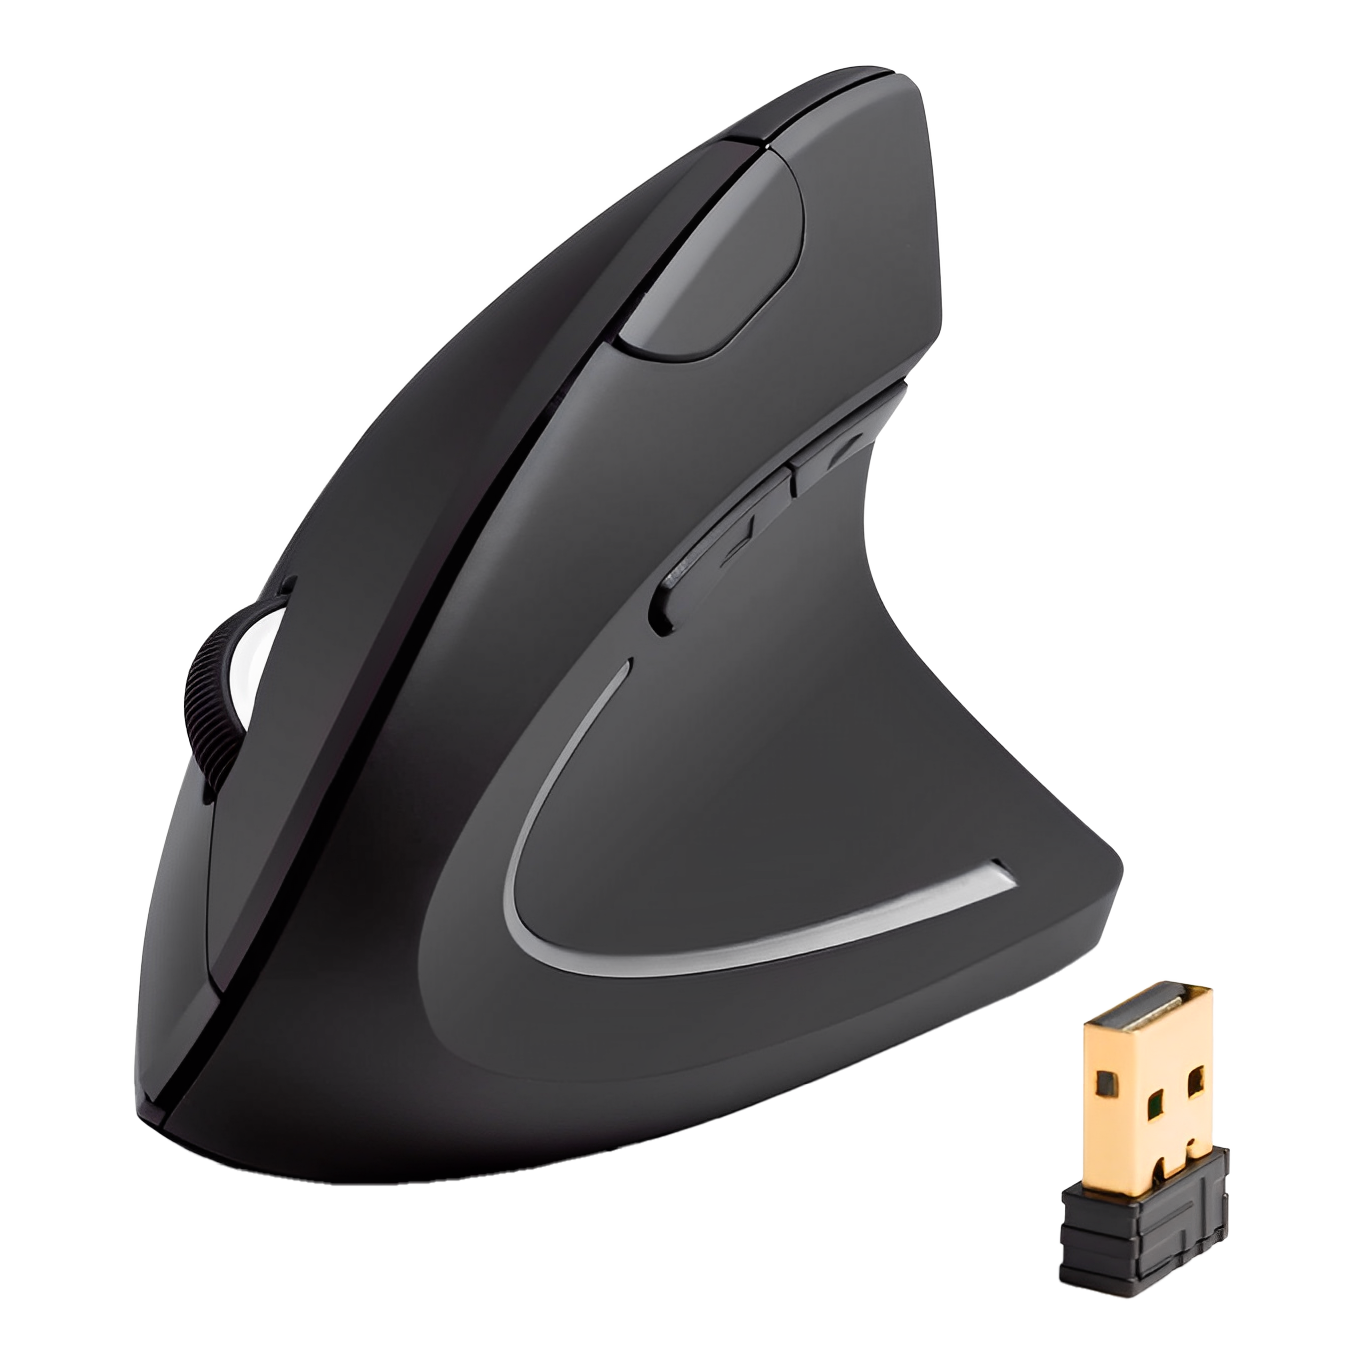 Anker 2.4G Wireless Optical Mouse